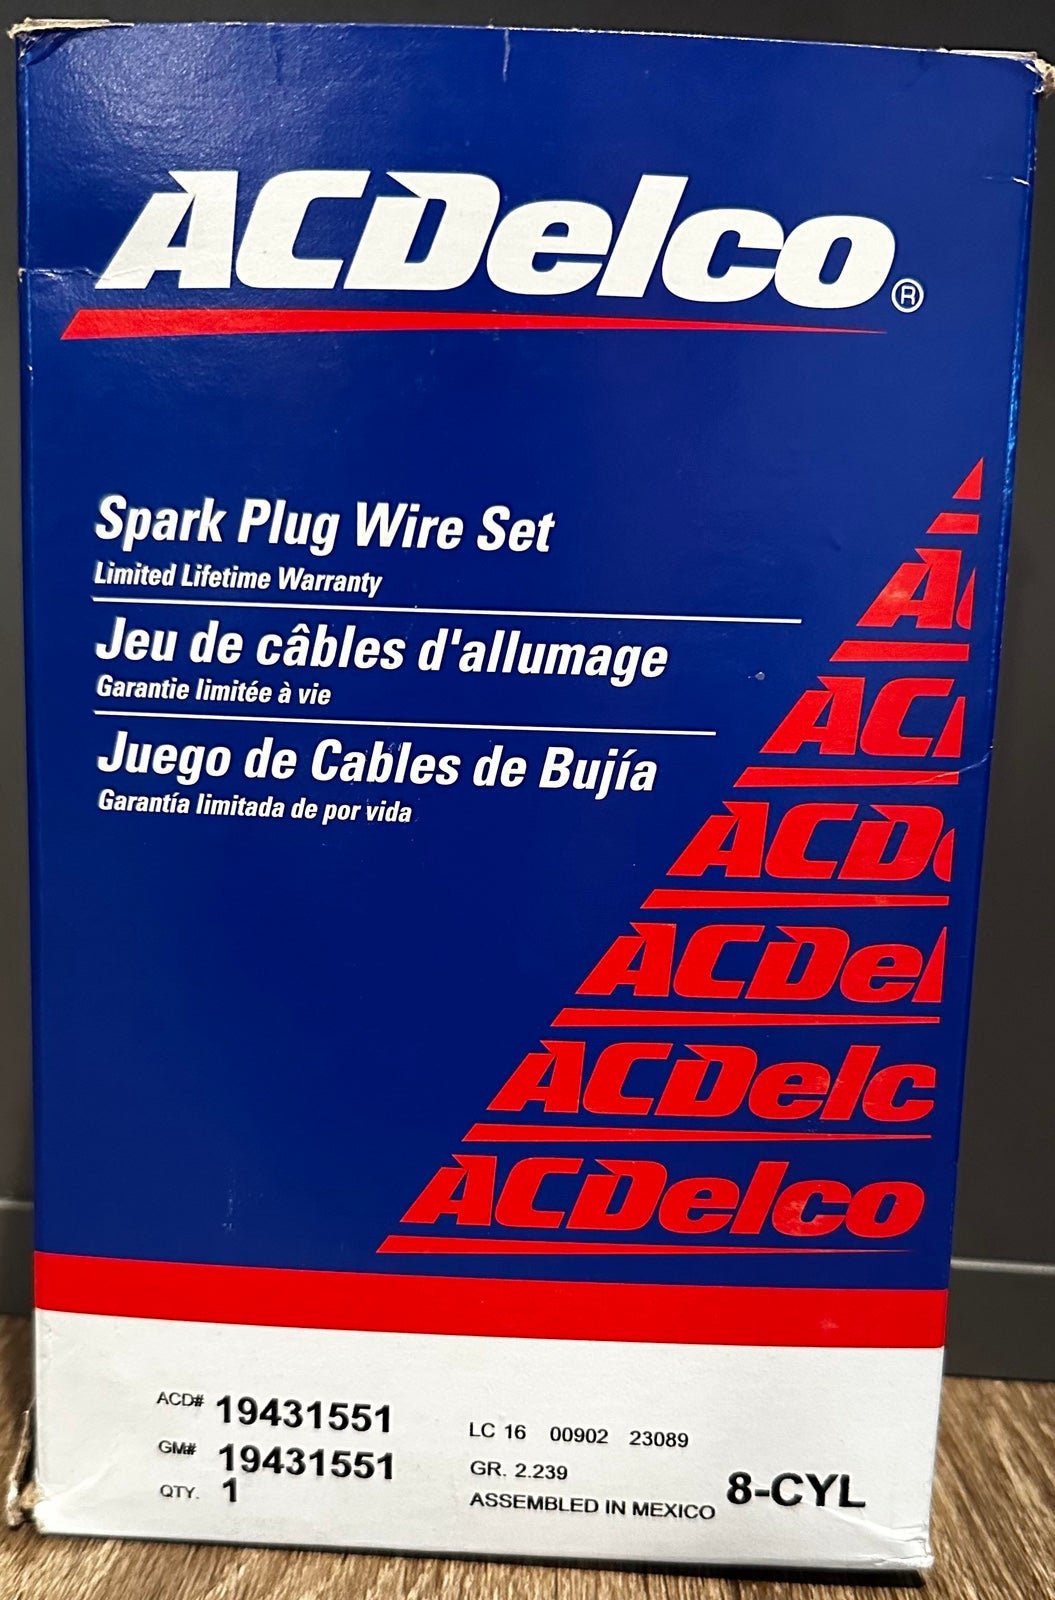 New ACDelco spark plug wire set BnVfB9GMB